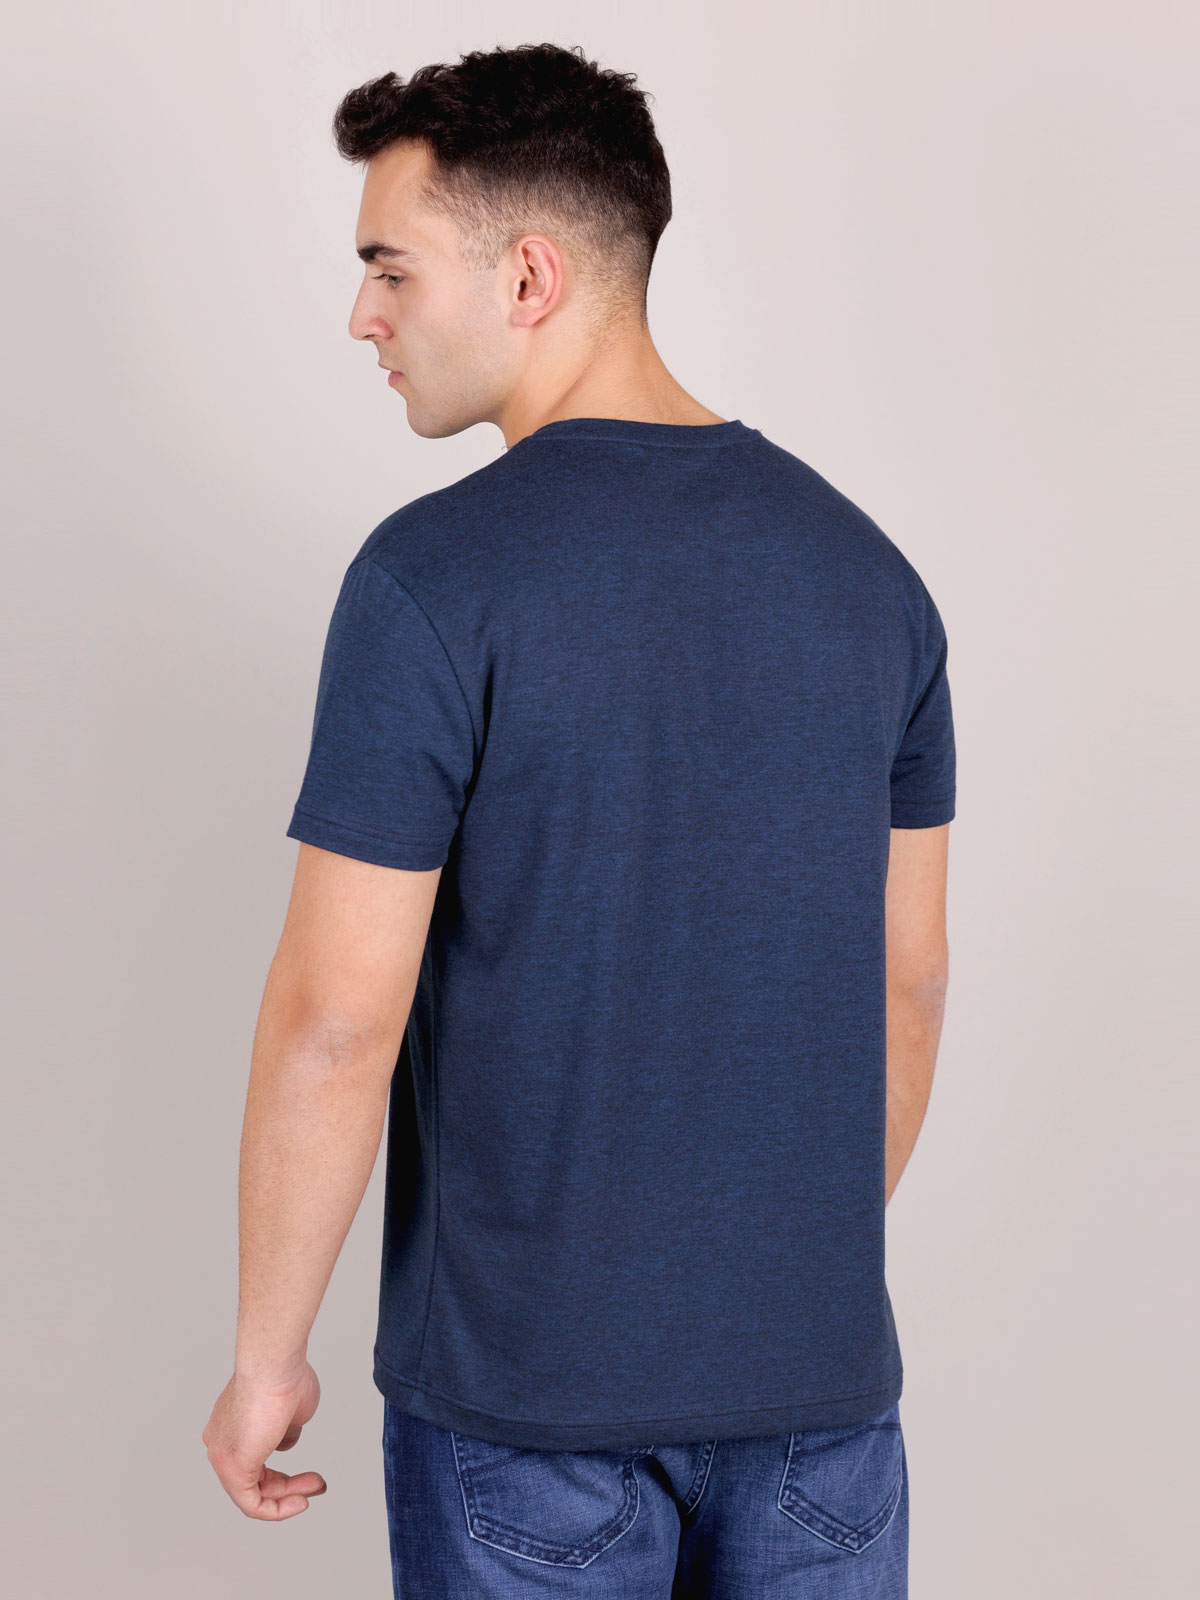 Tshirt in blue with a color print - 96461 € 23.62 img2